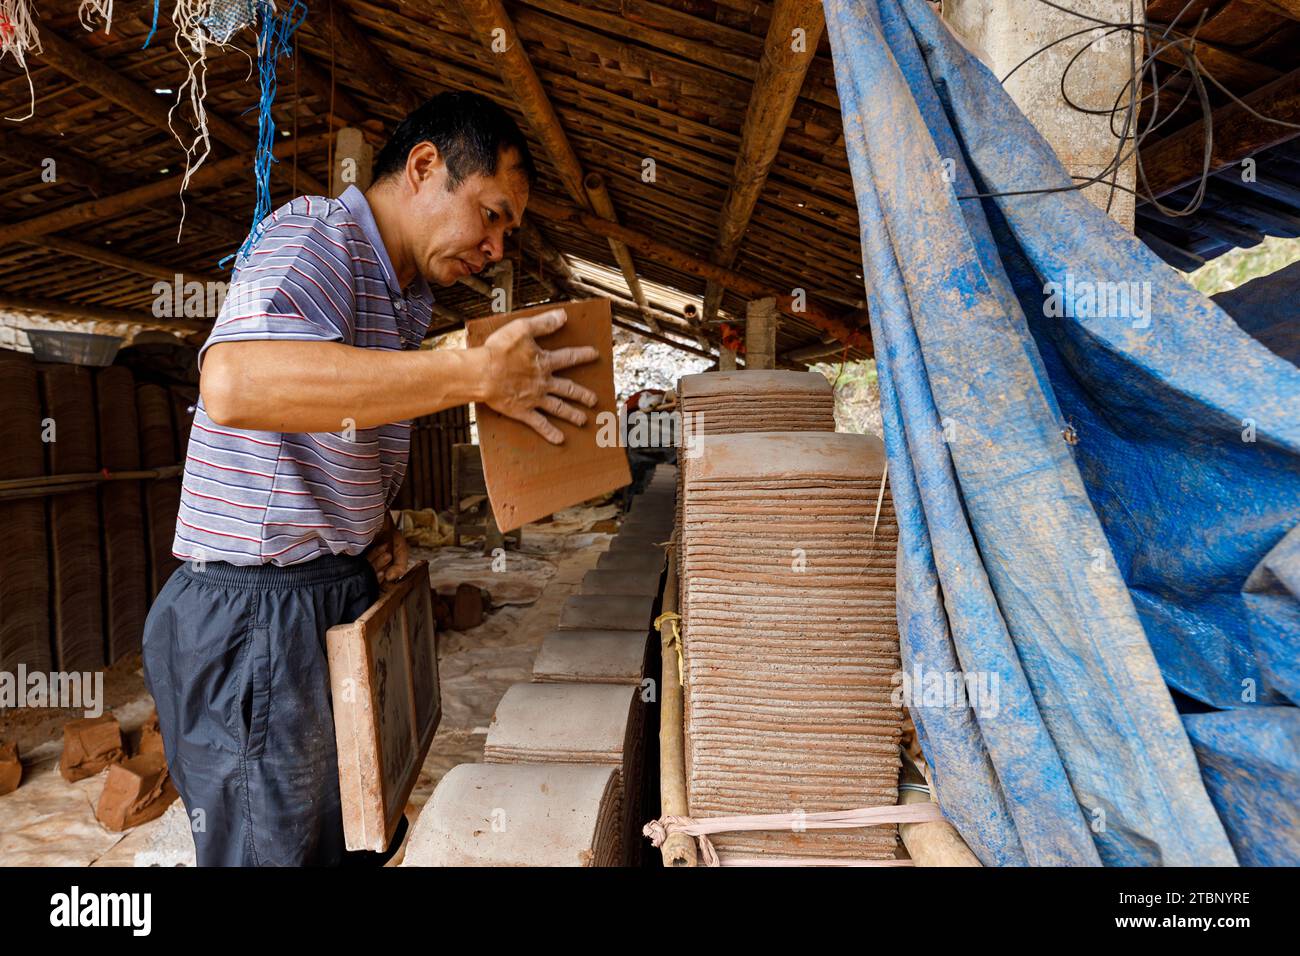 Tiles are handmade in Bac Son in Vietnam Stock Photo